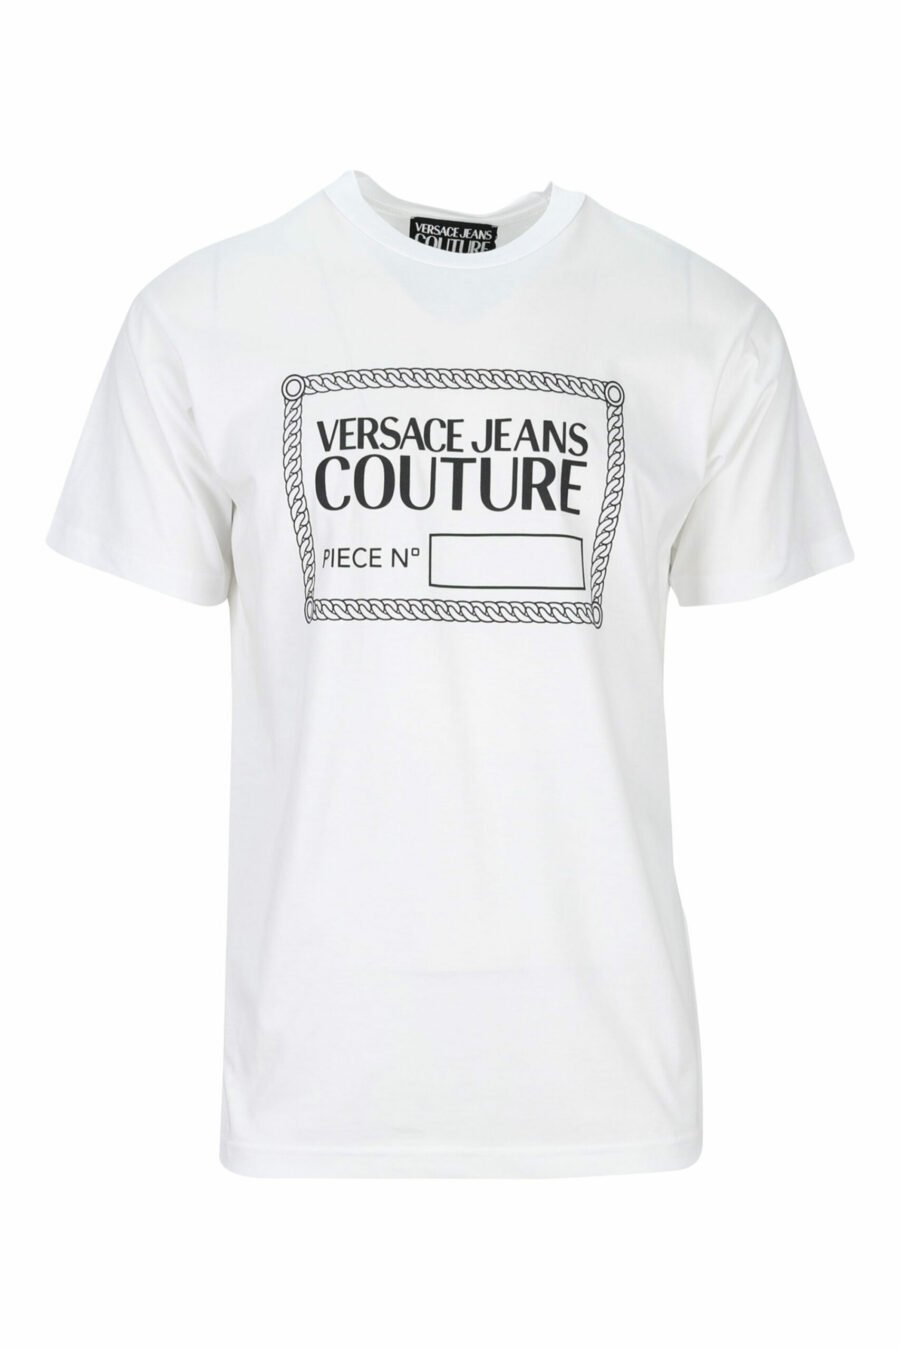 White T-shirt with black "piece number" maxilogo - 8052019468663 scaled